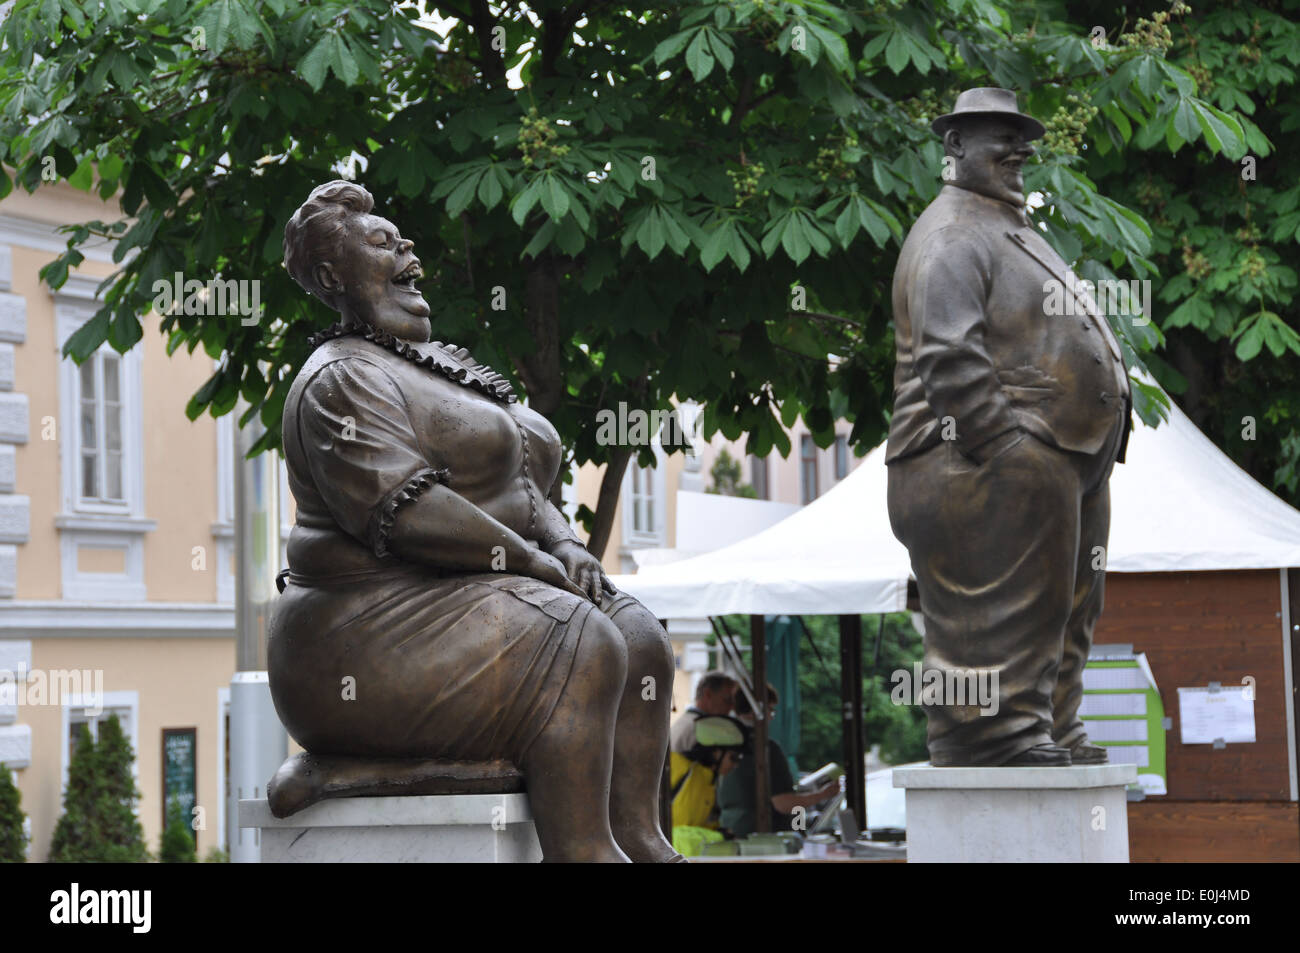 Two bronze statues of a large woman and a large man outside the Karikatur Museum (Caricature museum), Krems an der Donau. Stock Photo